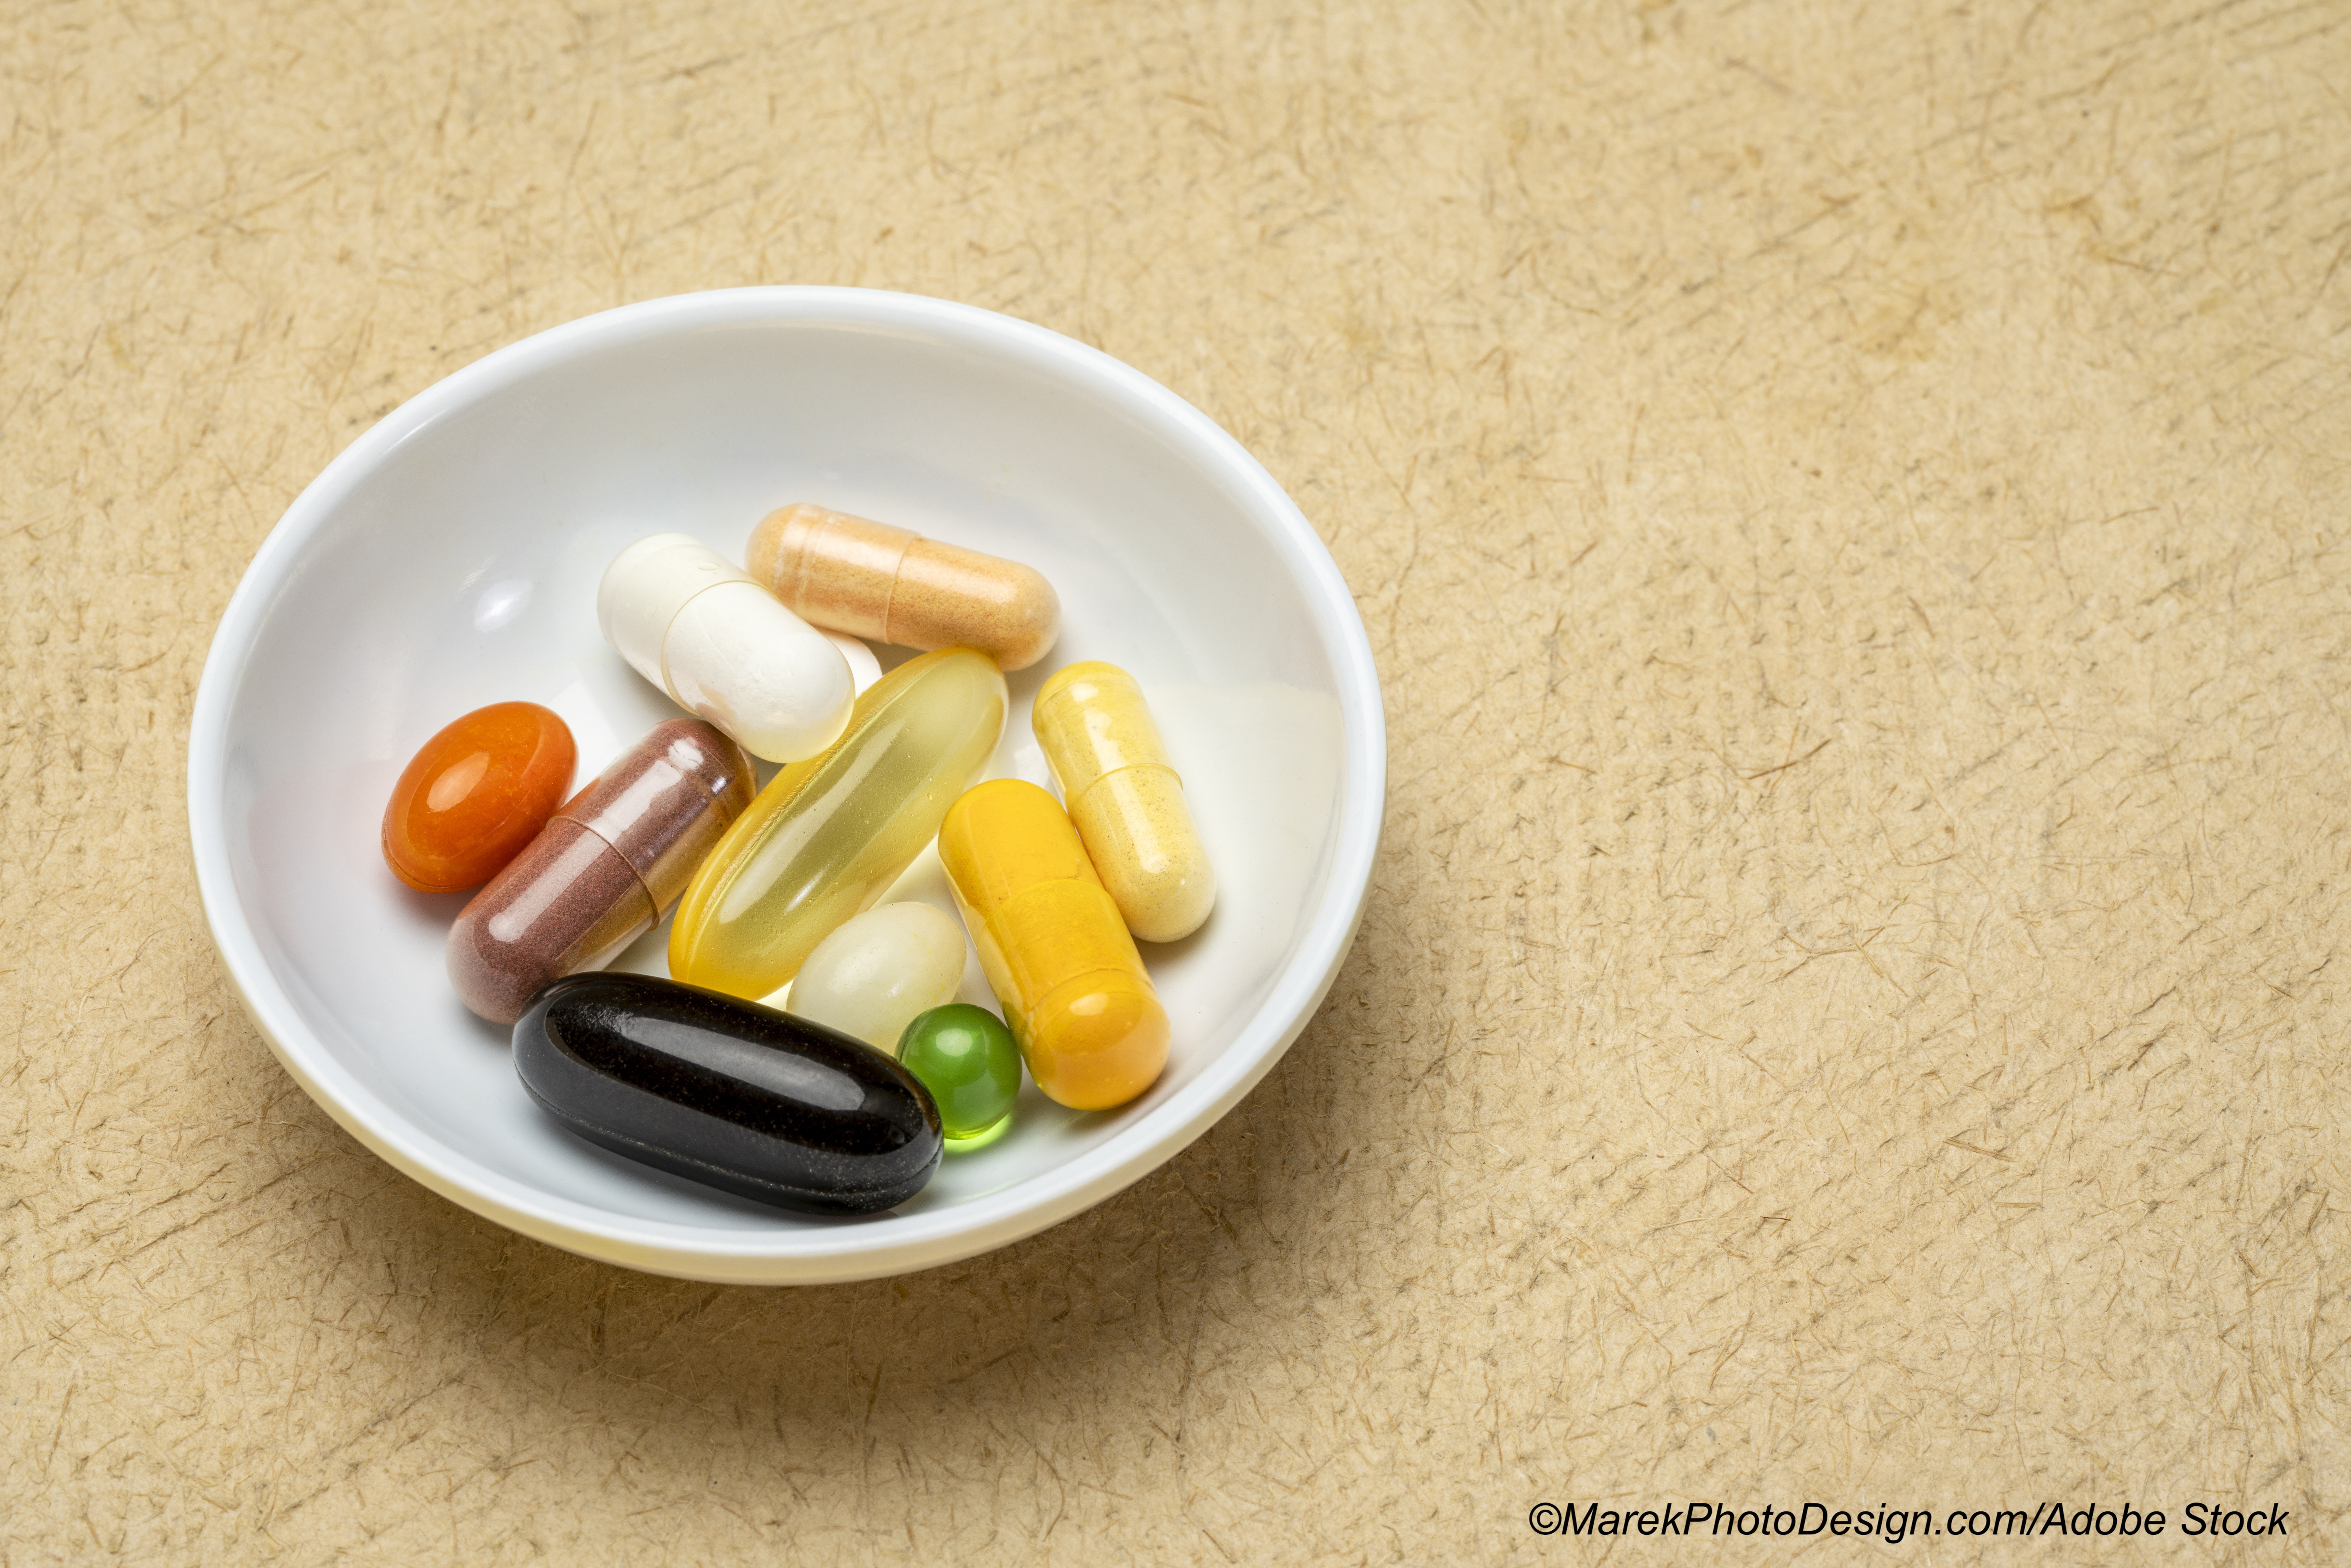 Going Against Guidance, 1 in 5 Cancer Pts Take Supplements to Lower Risk of Recurrence